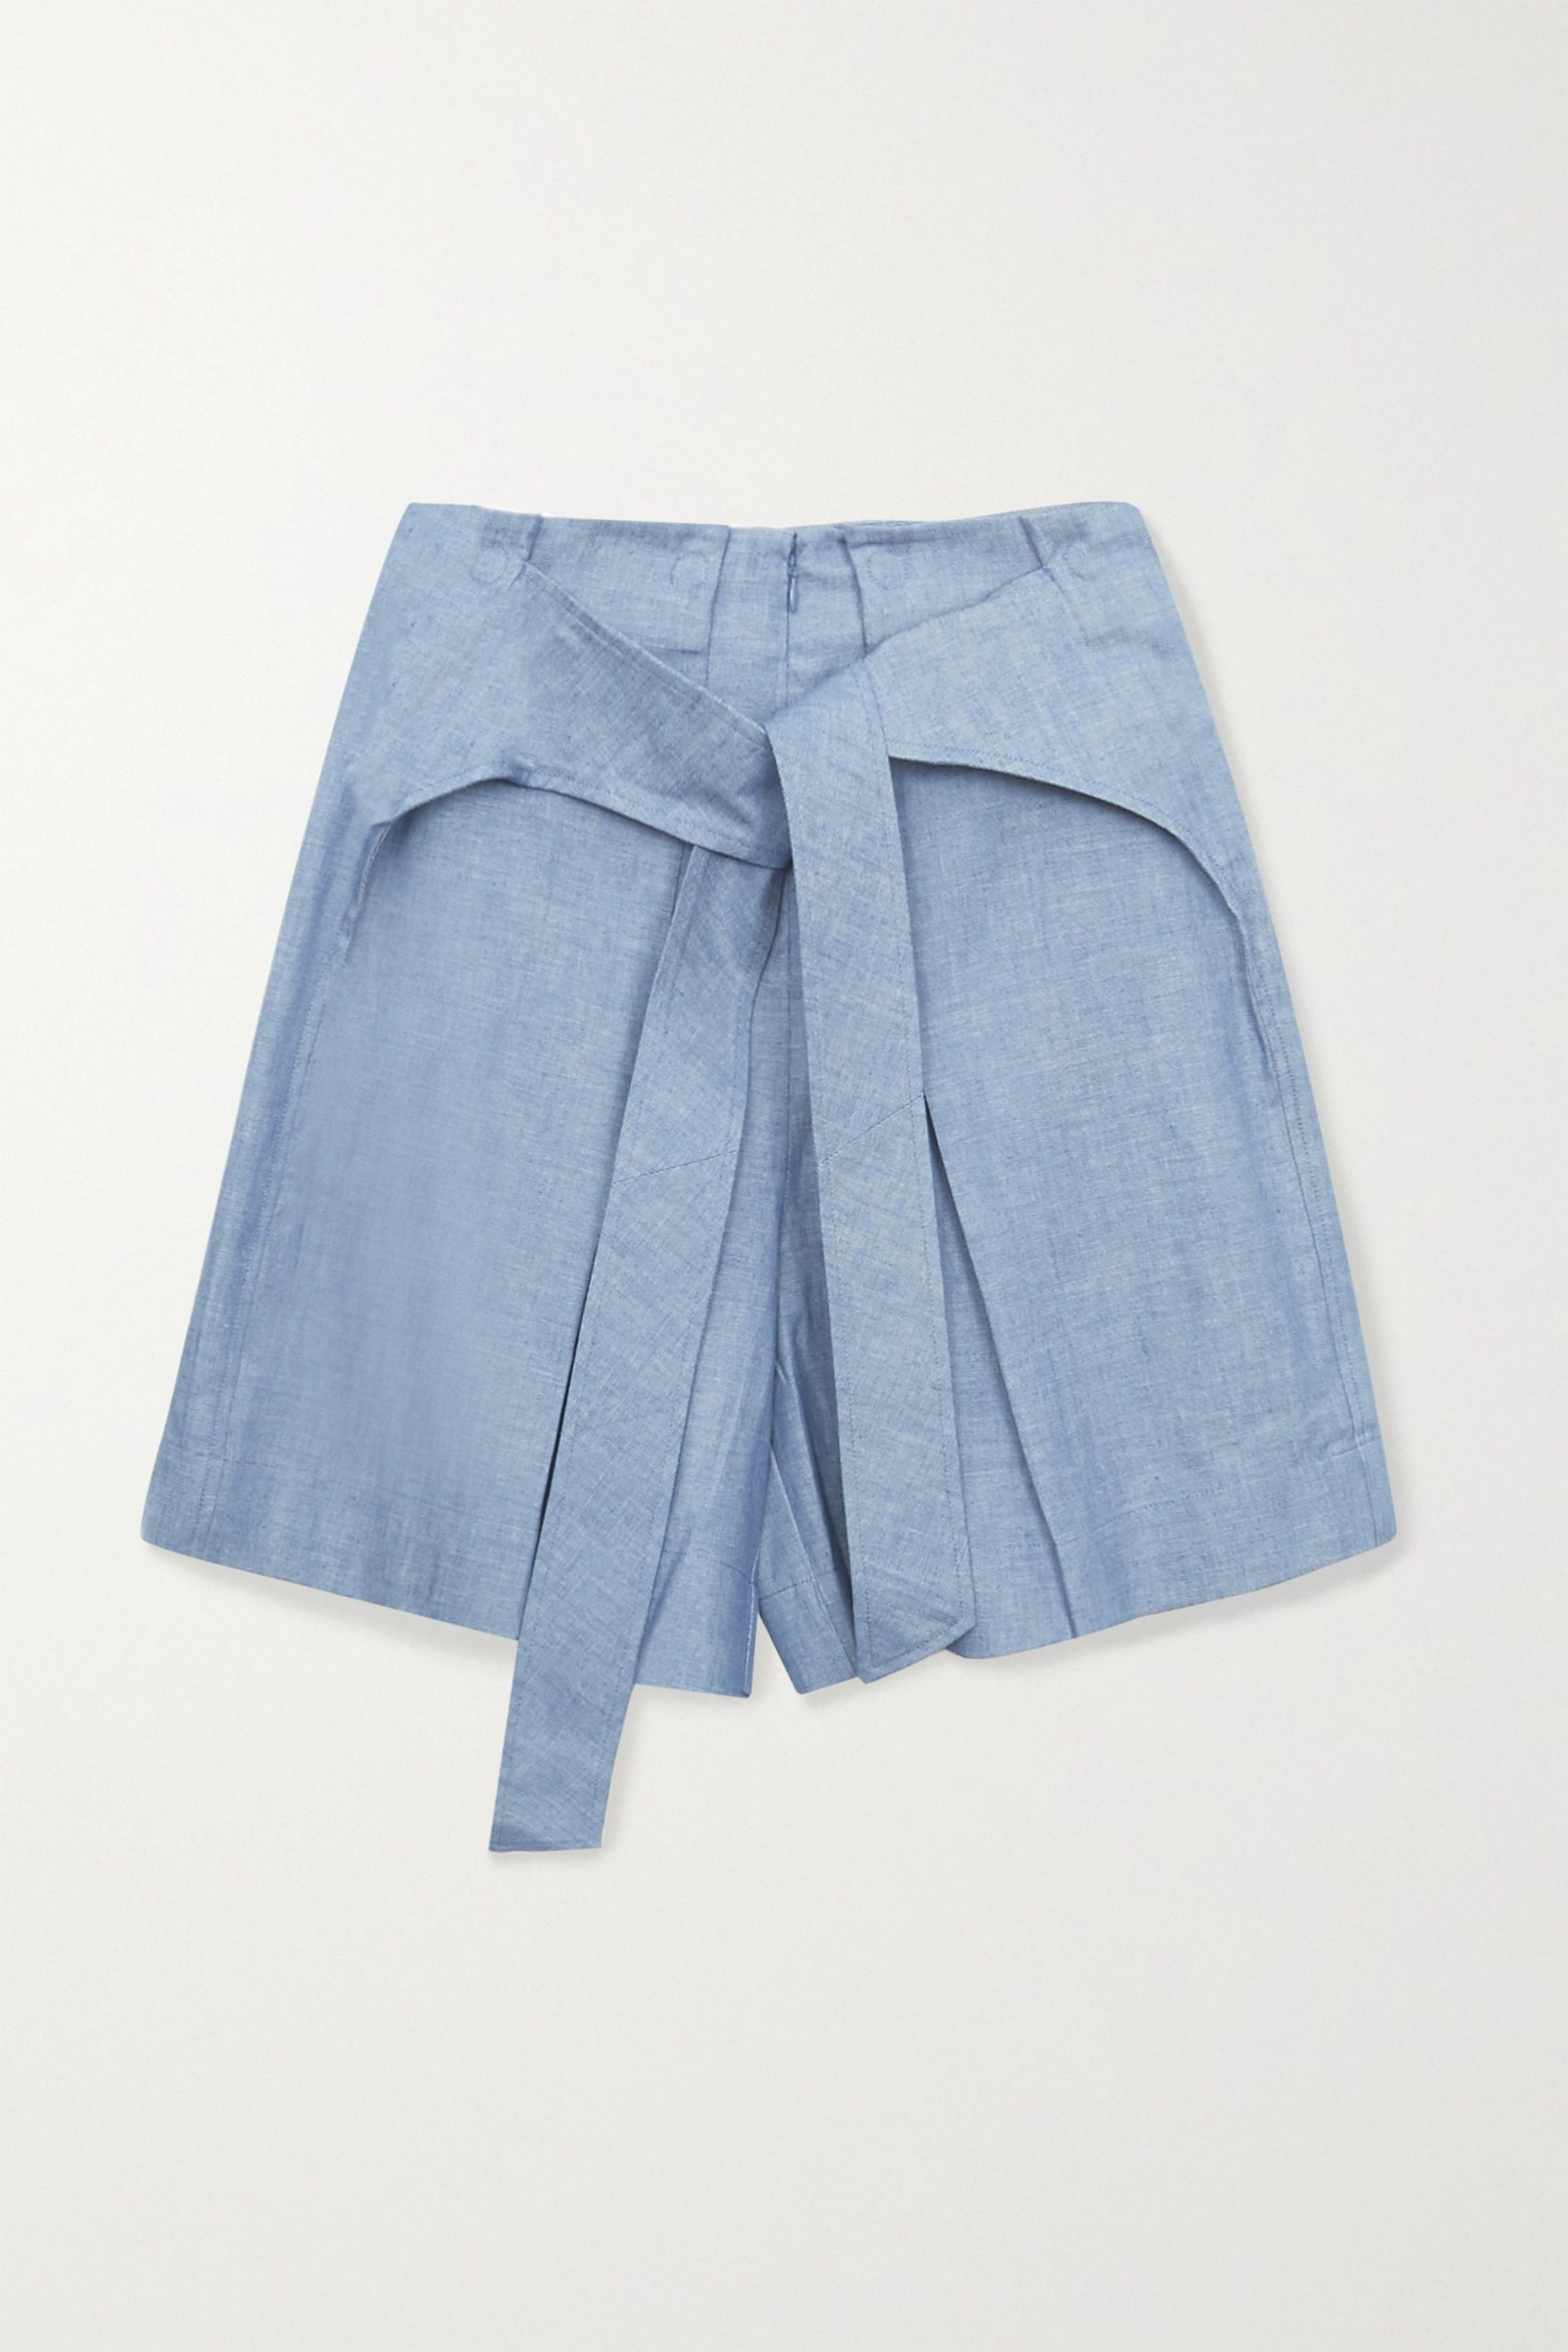 3.1 Phillip Lim - Tie-Front Cotton-Chambray Shorts | ABOUT ICONS